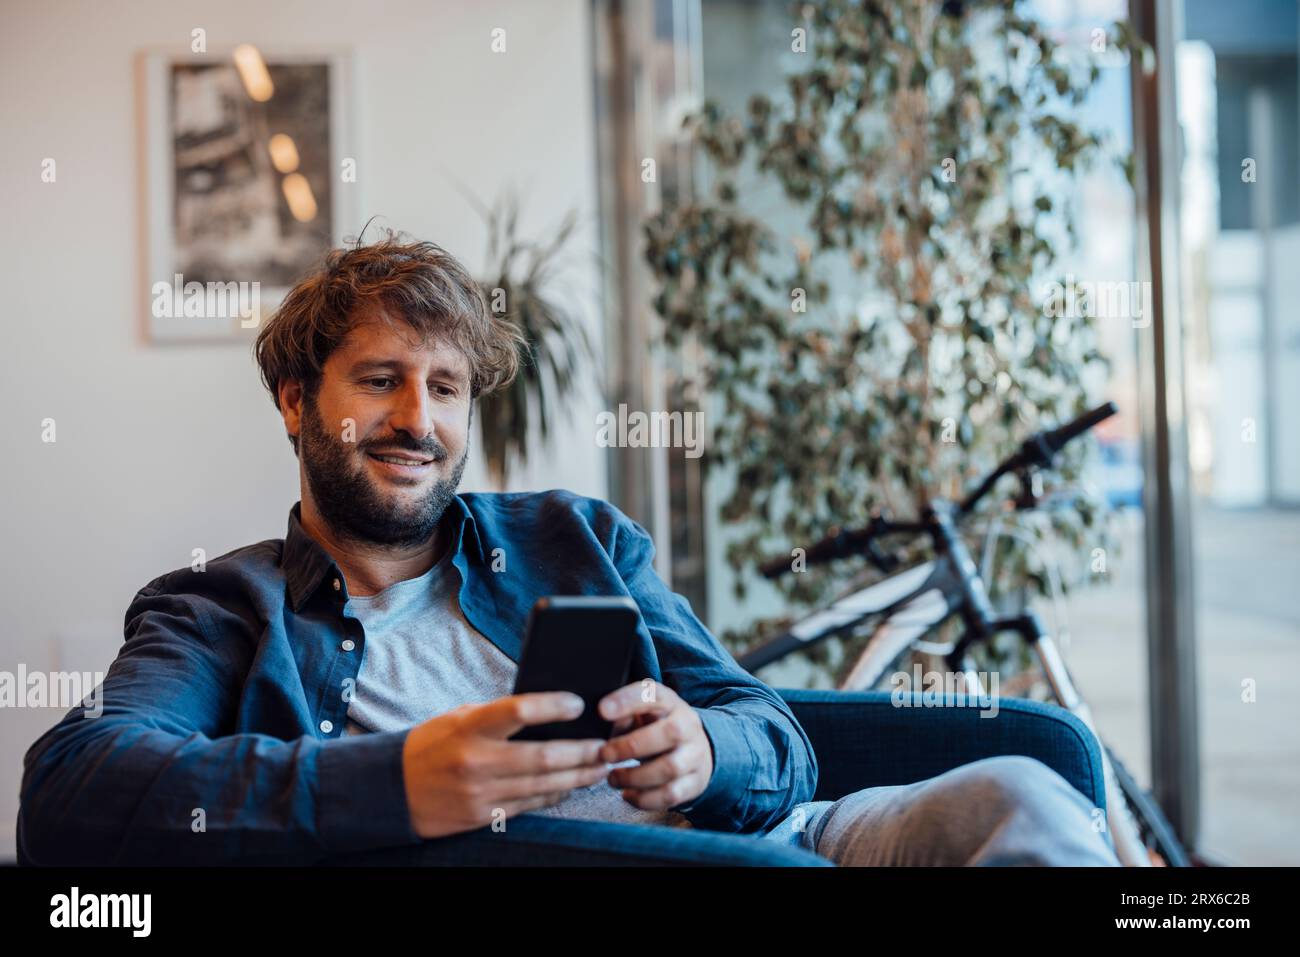 Smiling businessman using smart phone in office Banque D'Images